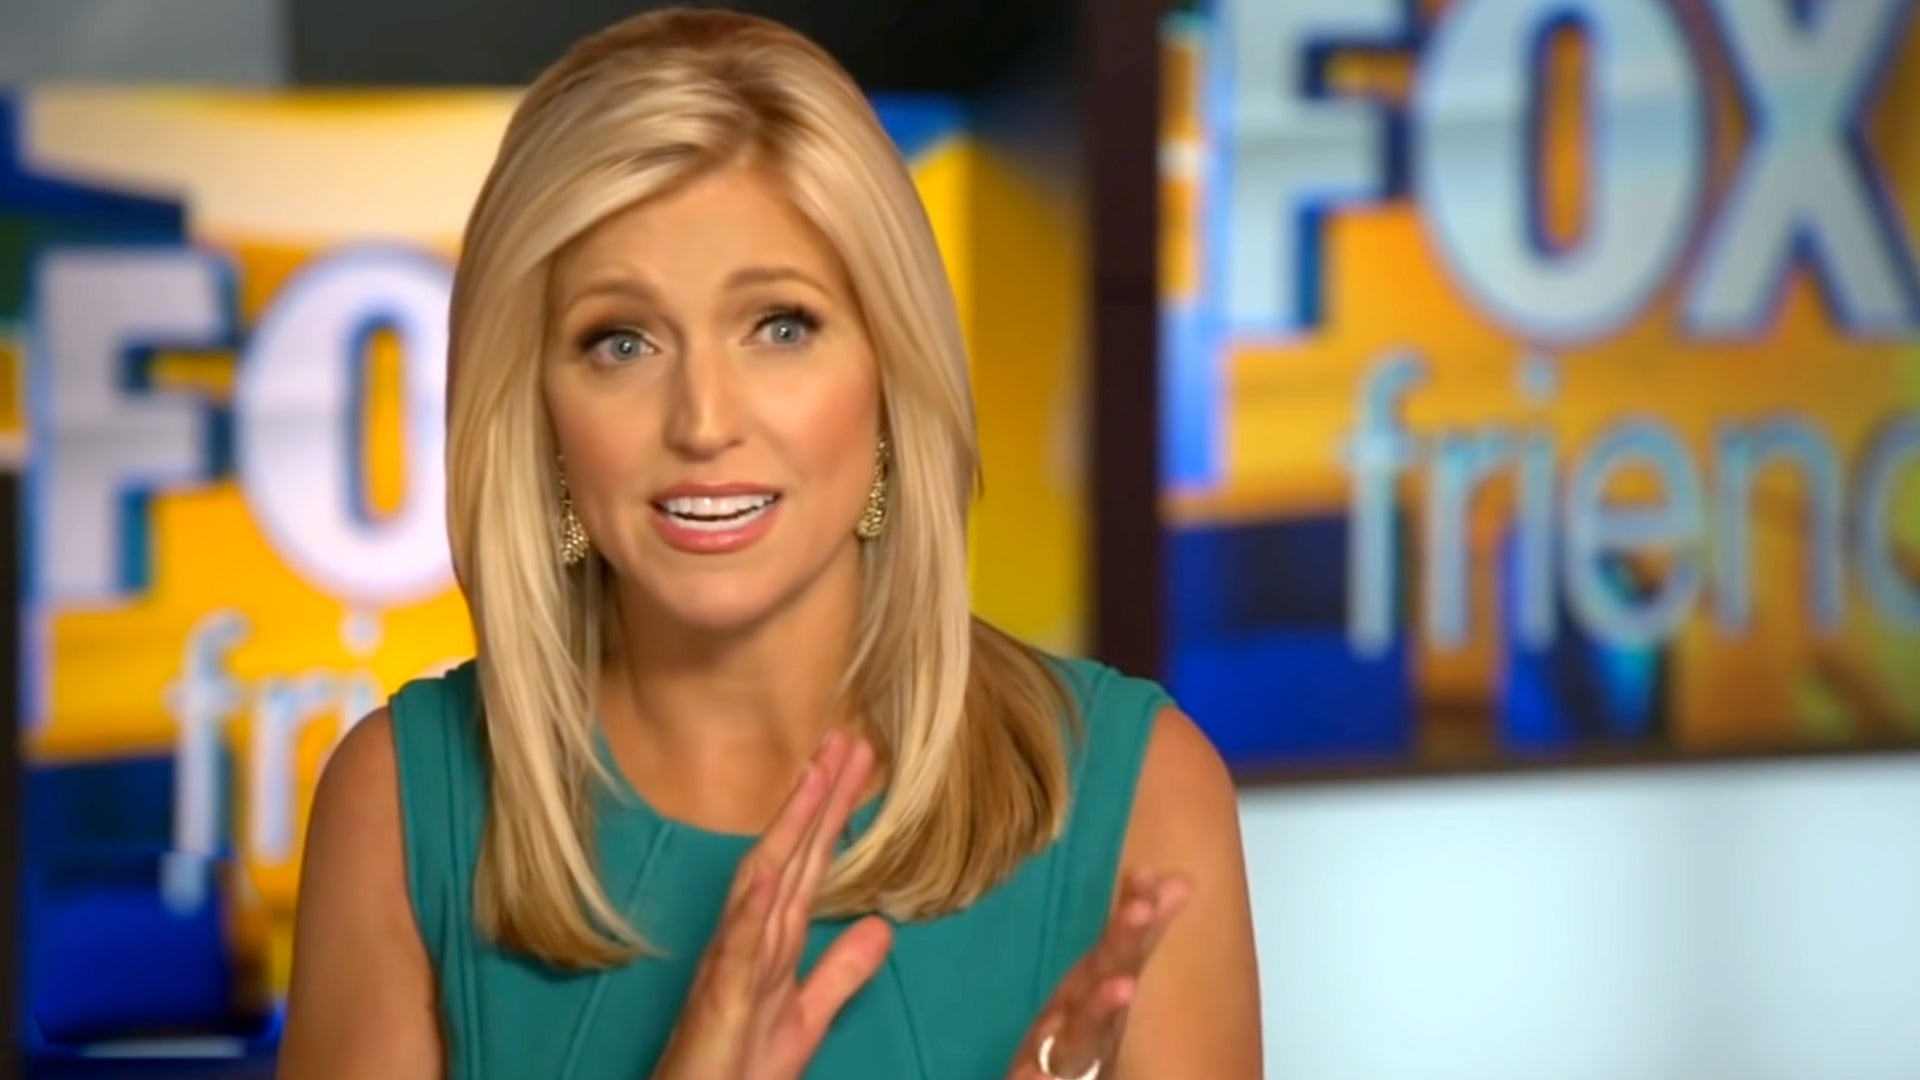 Proof Of Heaven Ainsley Earhardt Shares Stories Of Crossing Into The Afterlife In New Faith